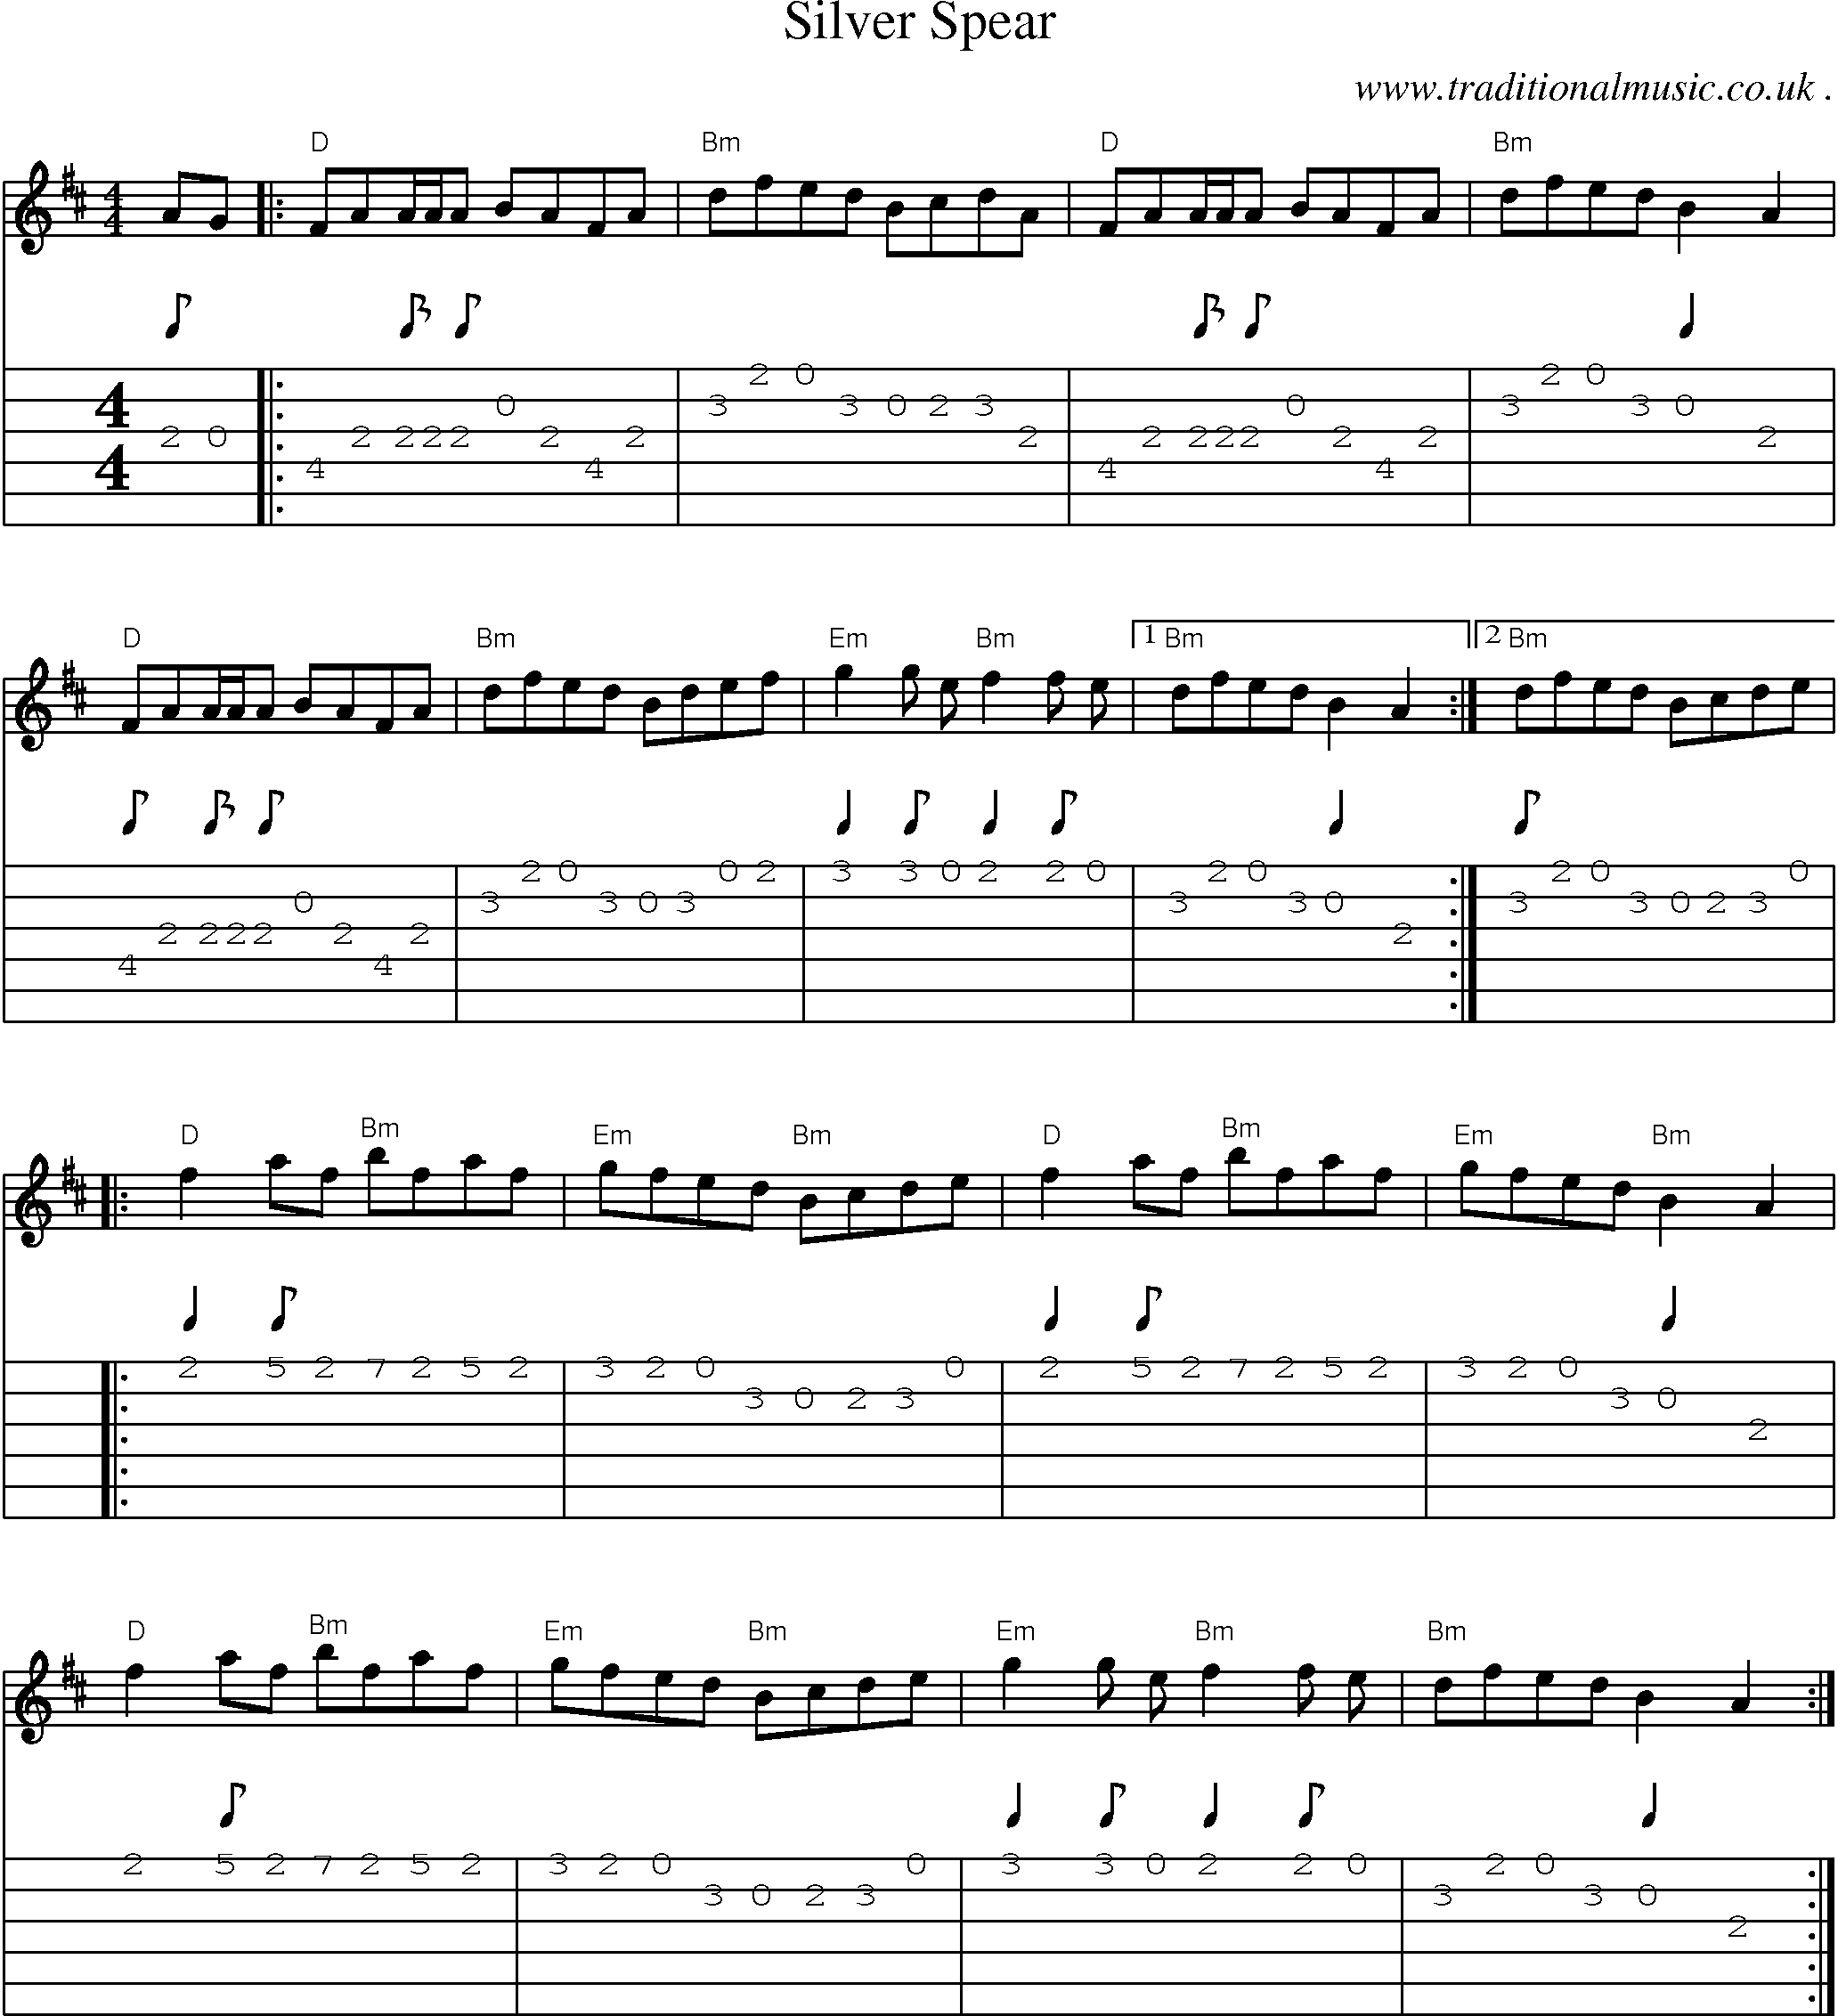 Music Score and Guitar Tabs for Silver Spear